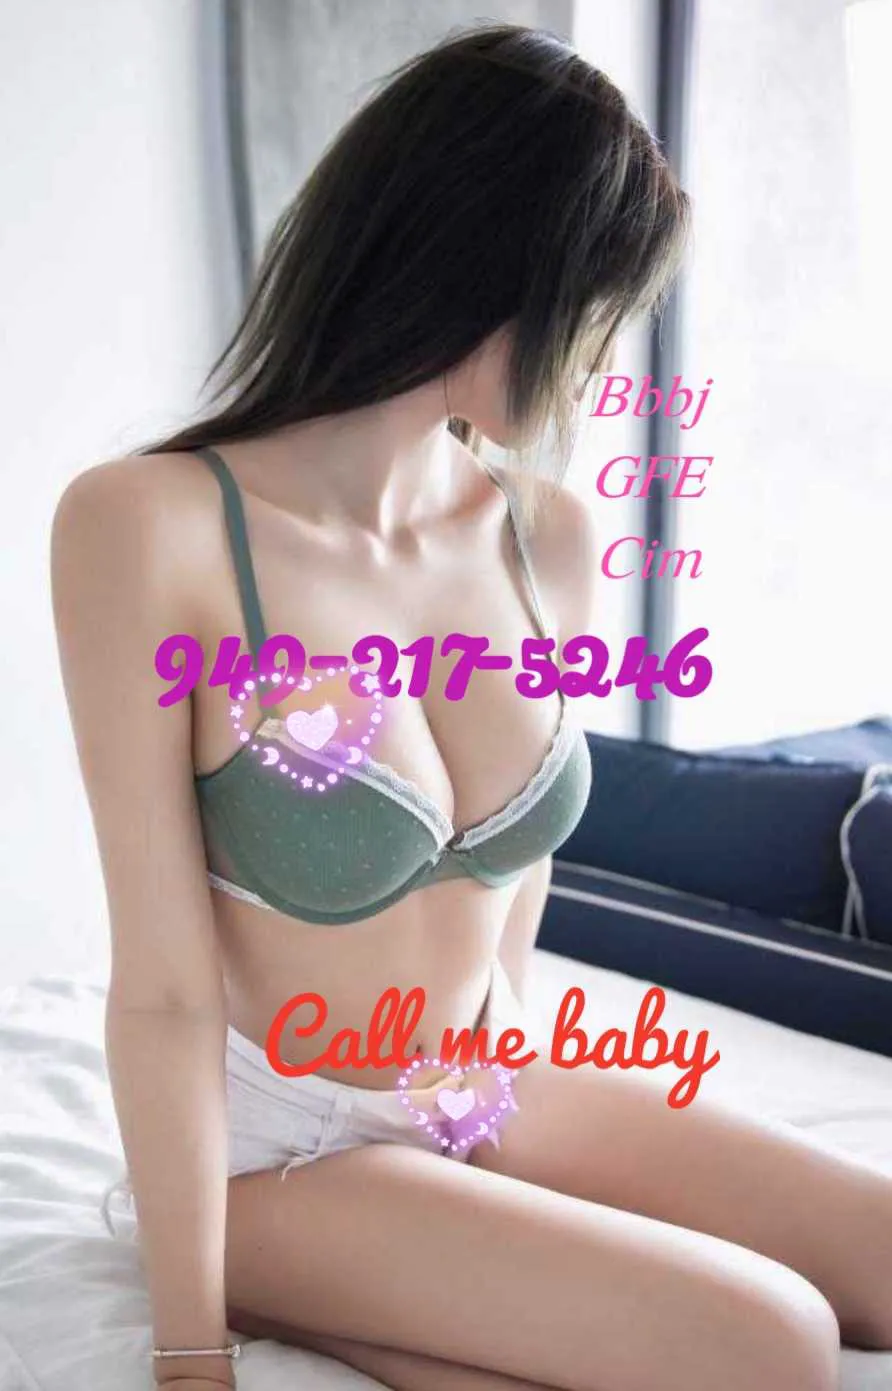 Reviews about escort with phone number 9492175246